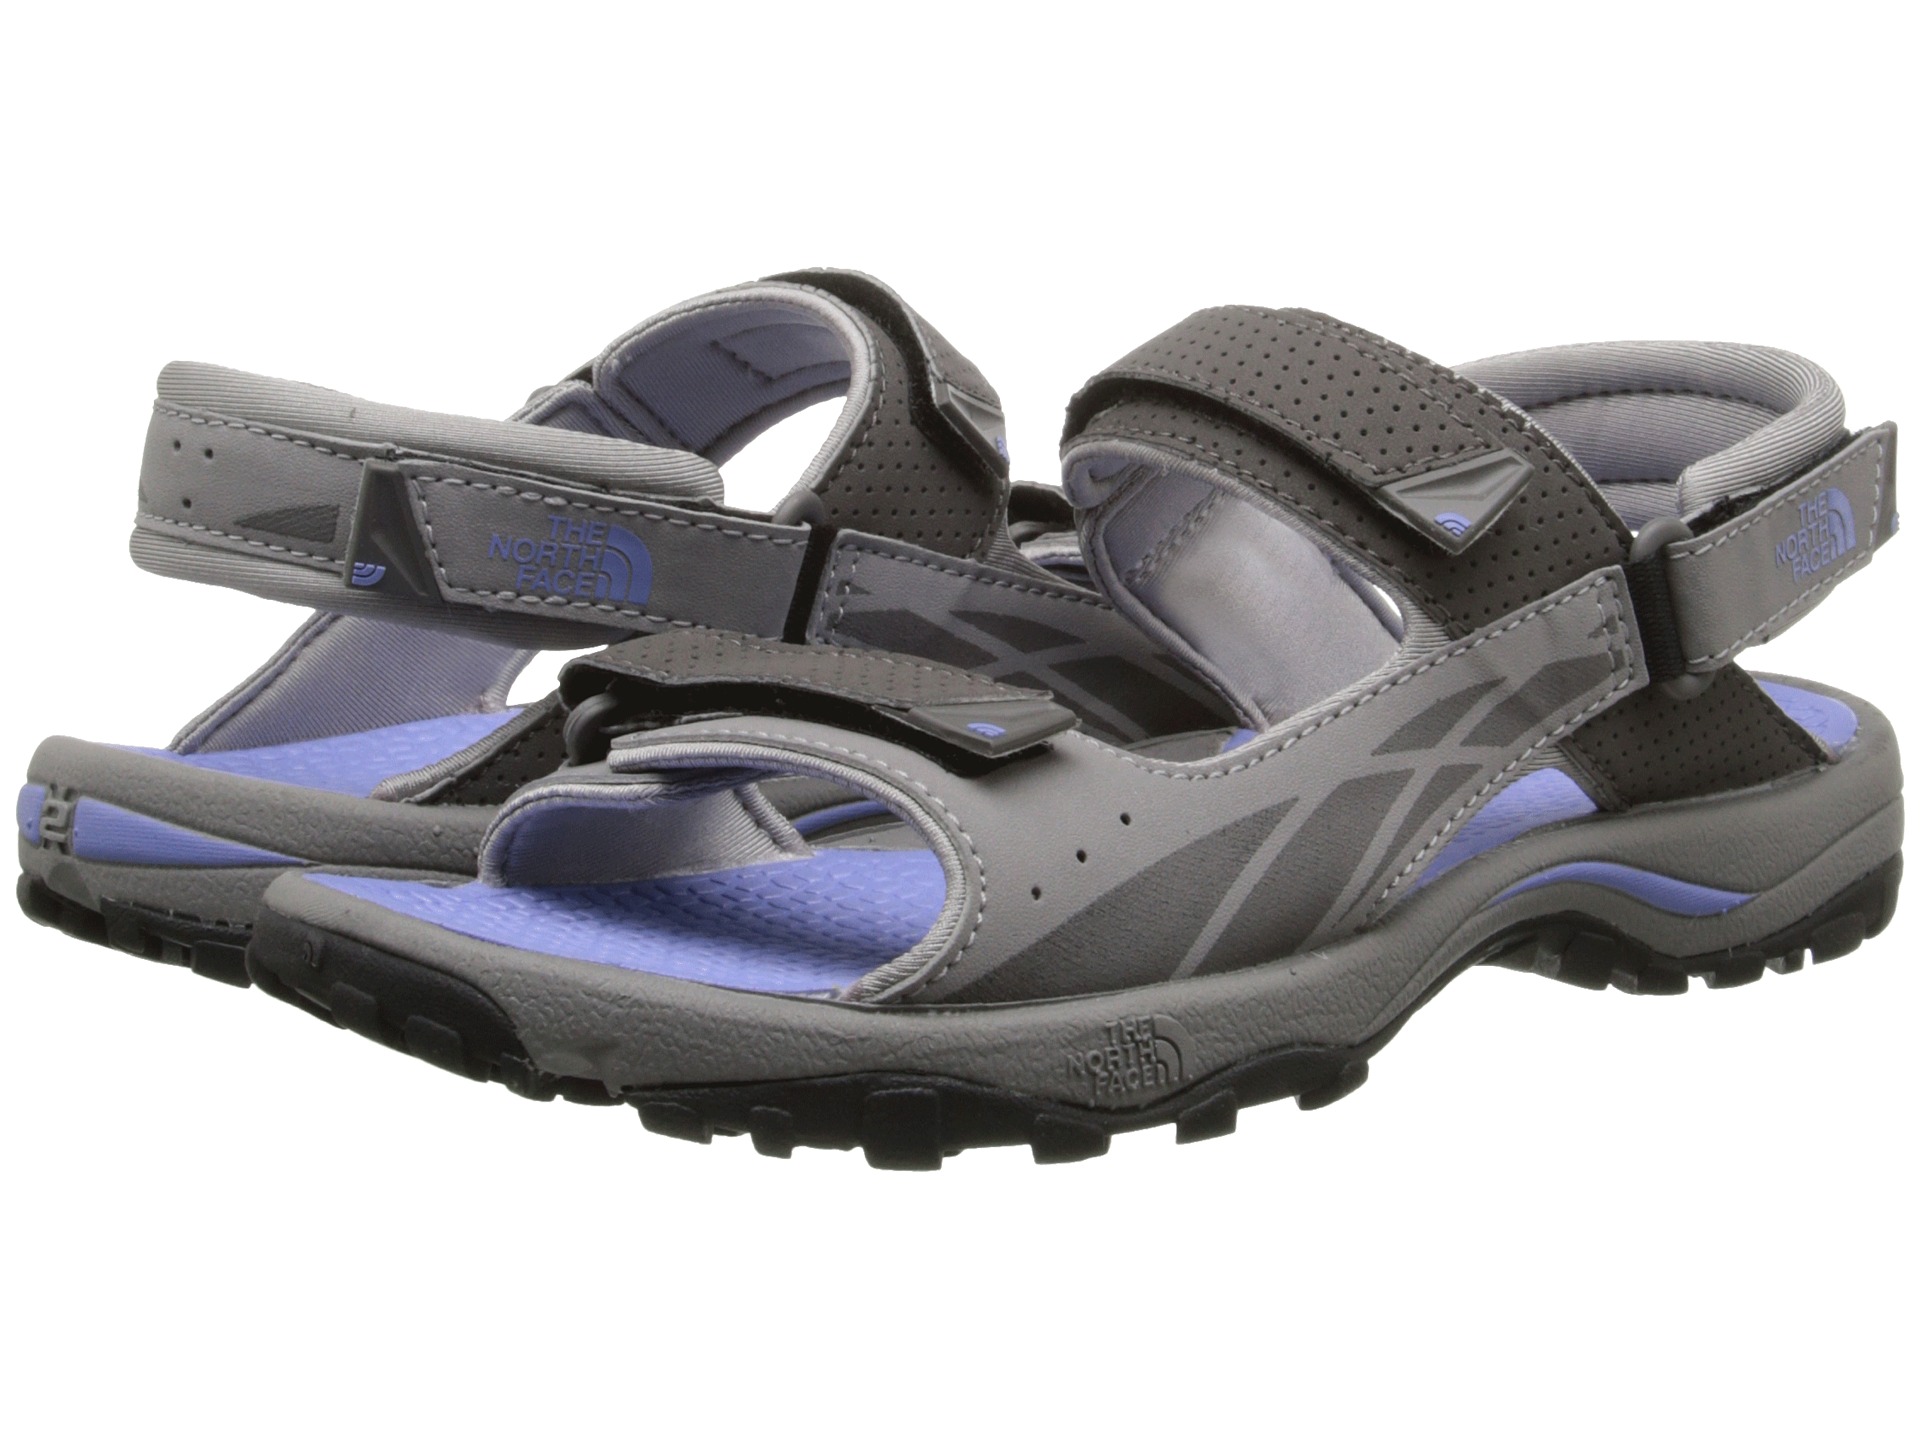 The North Face Storm Sandal - Zappos.com Free Shipping BOTH Ways